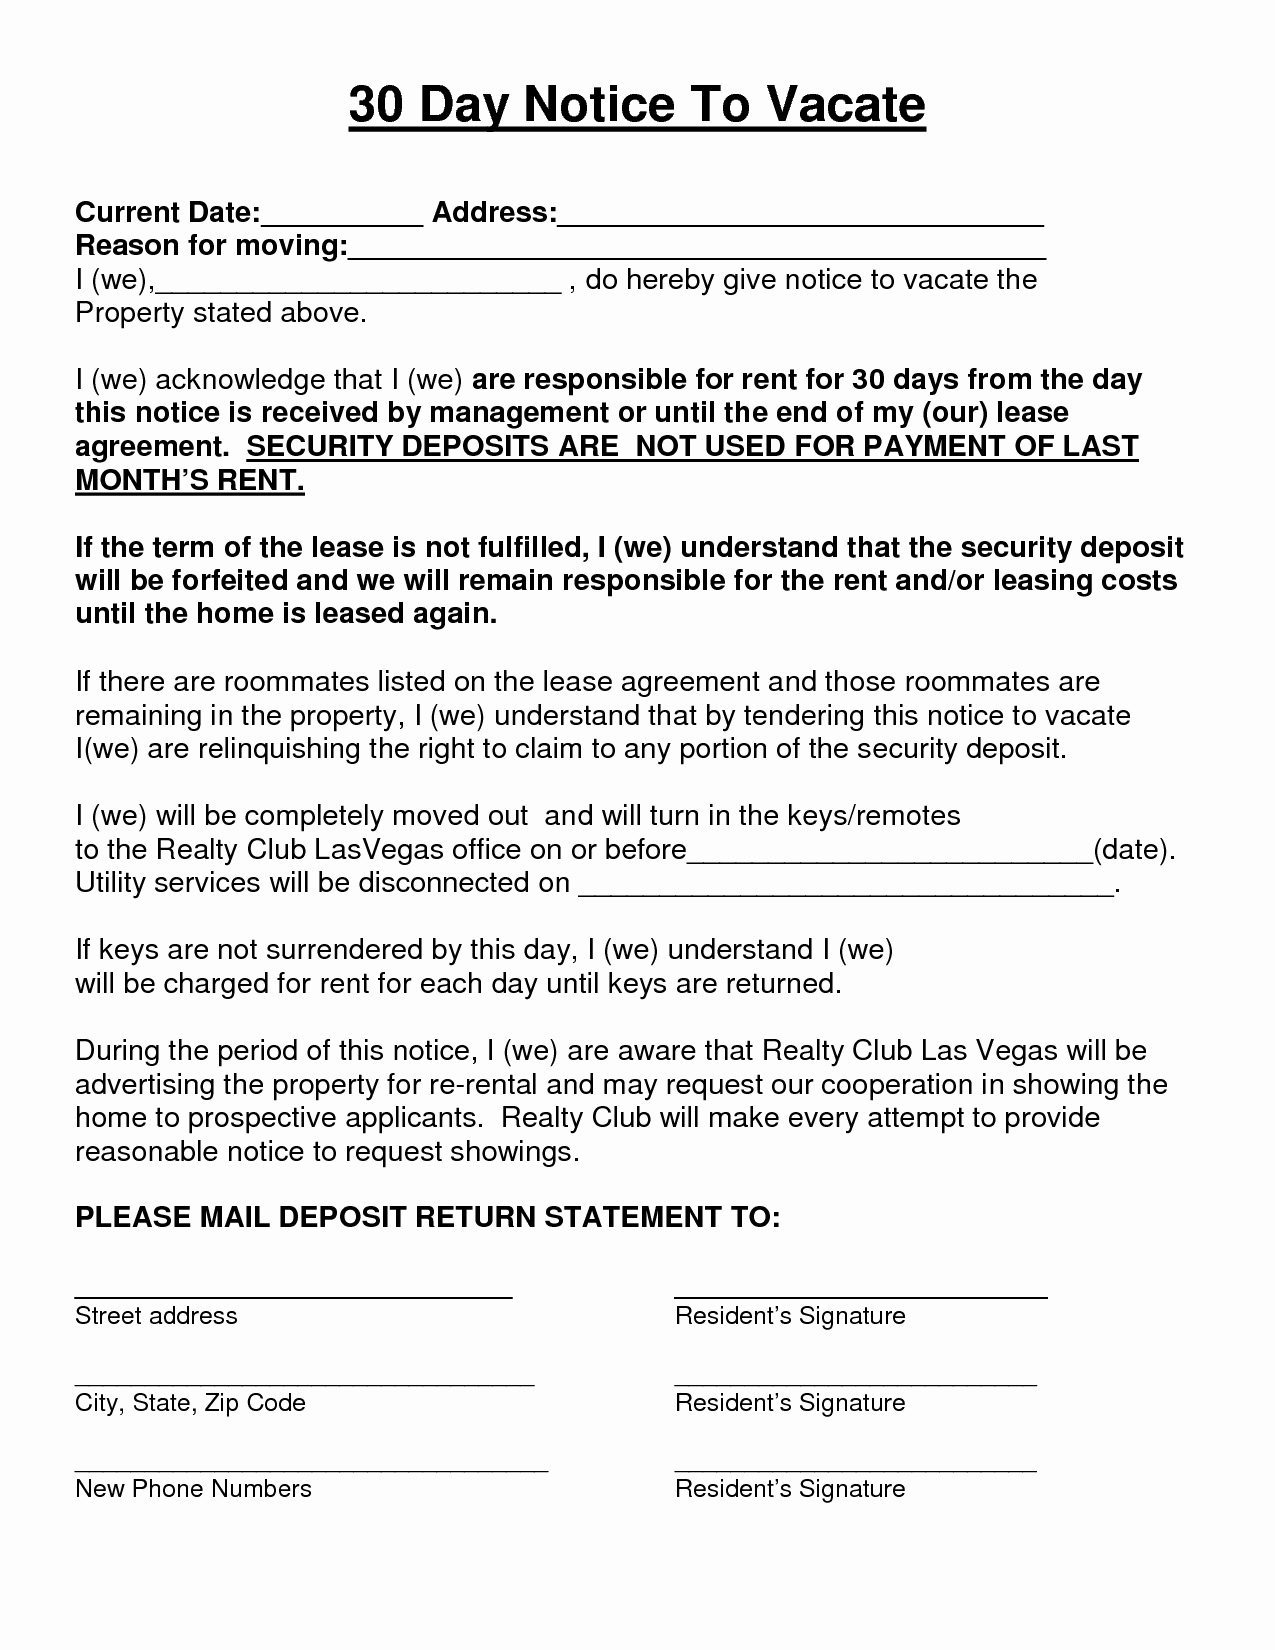 Notice to Vacate Texas Template Lovely Eviction Notice Texas Pdf 3 Day Notice Eviction Notice